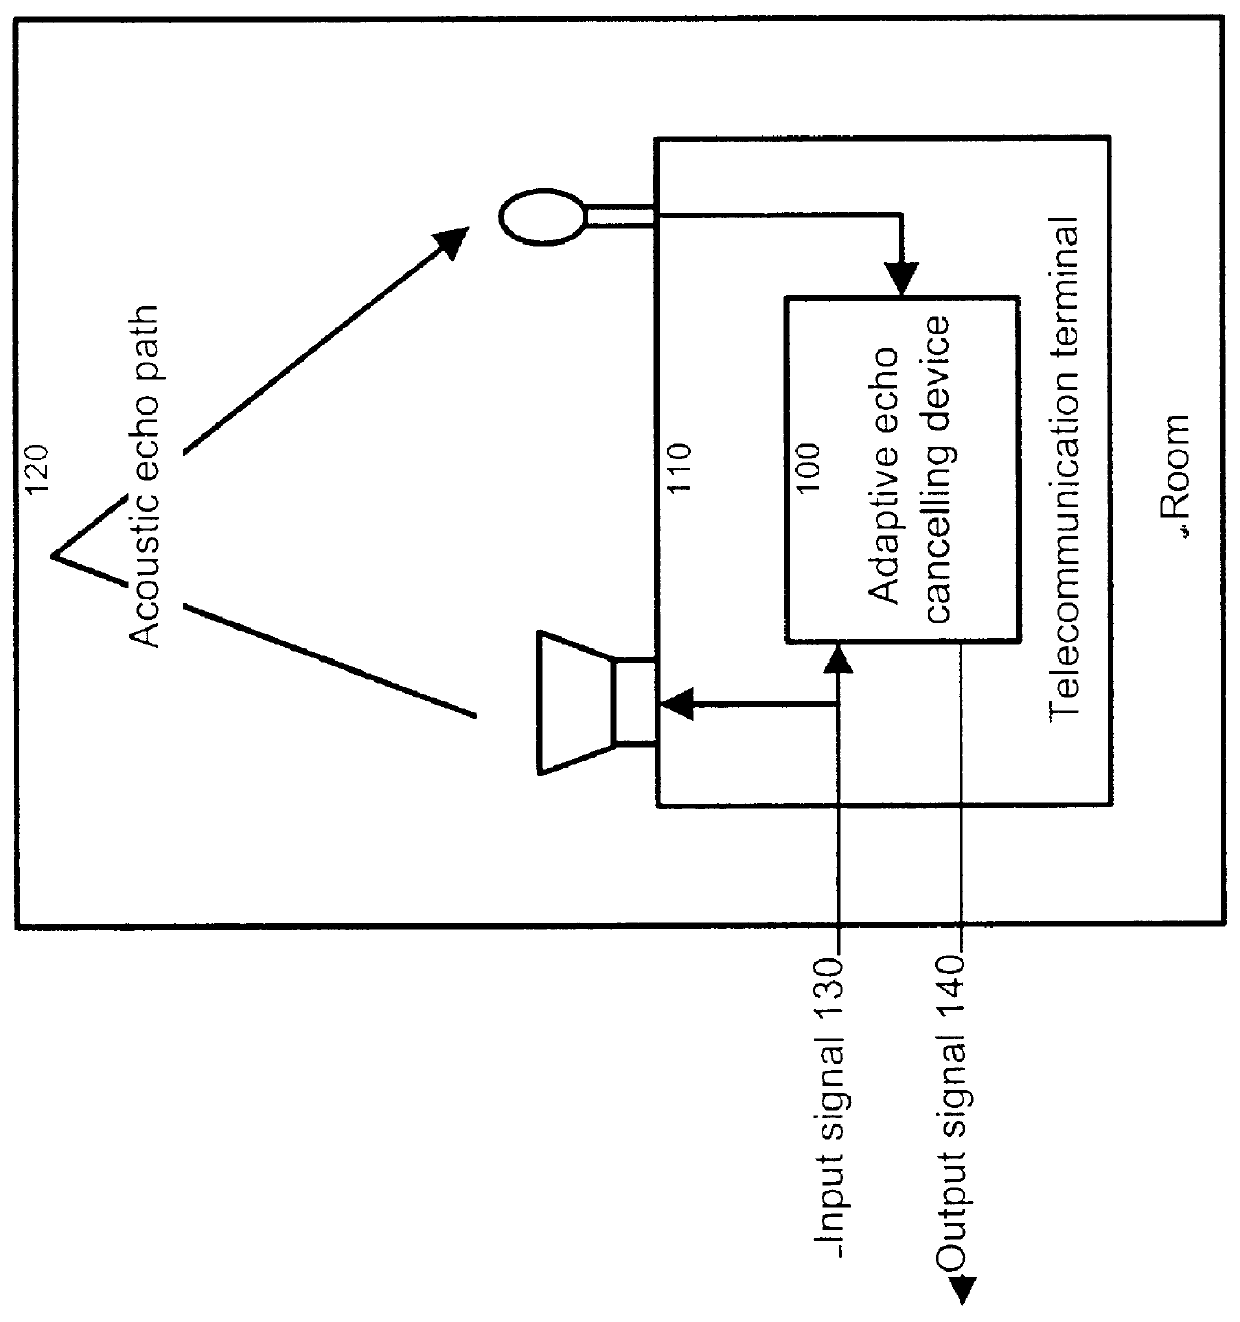 Adaptive echo cancelling system for telephony applications